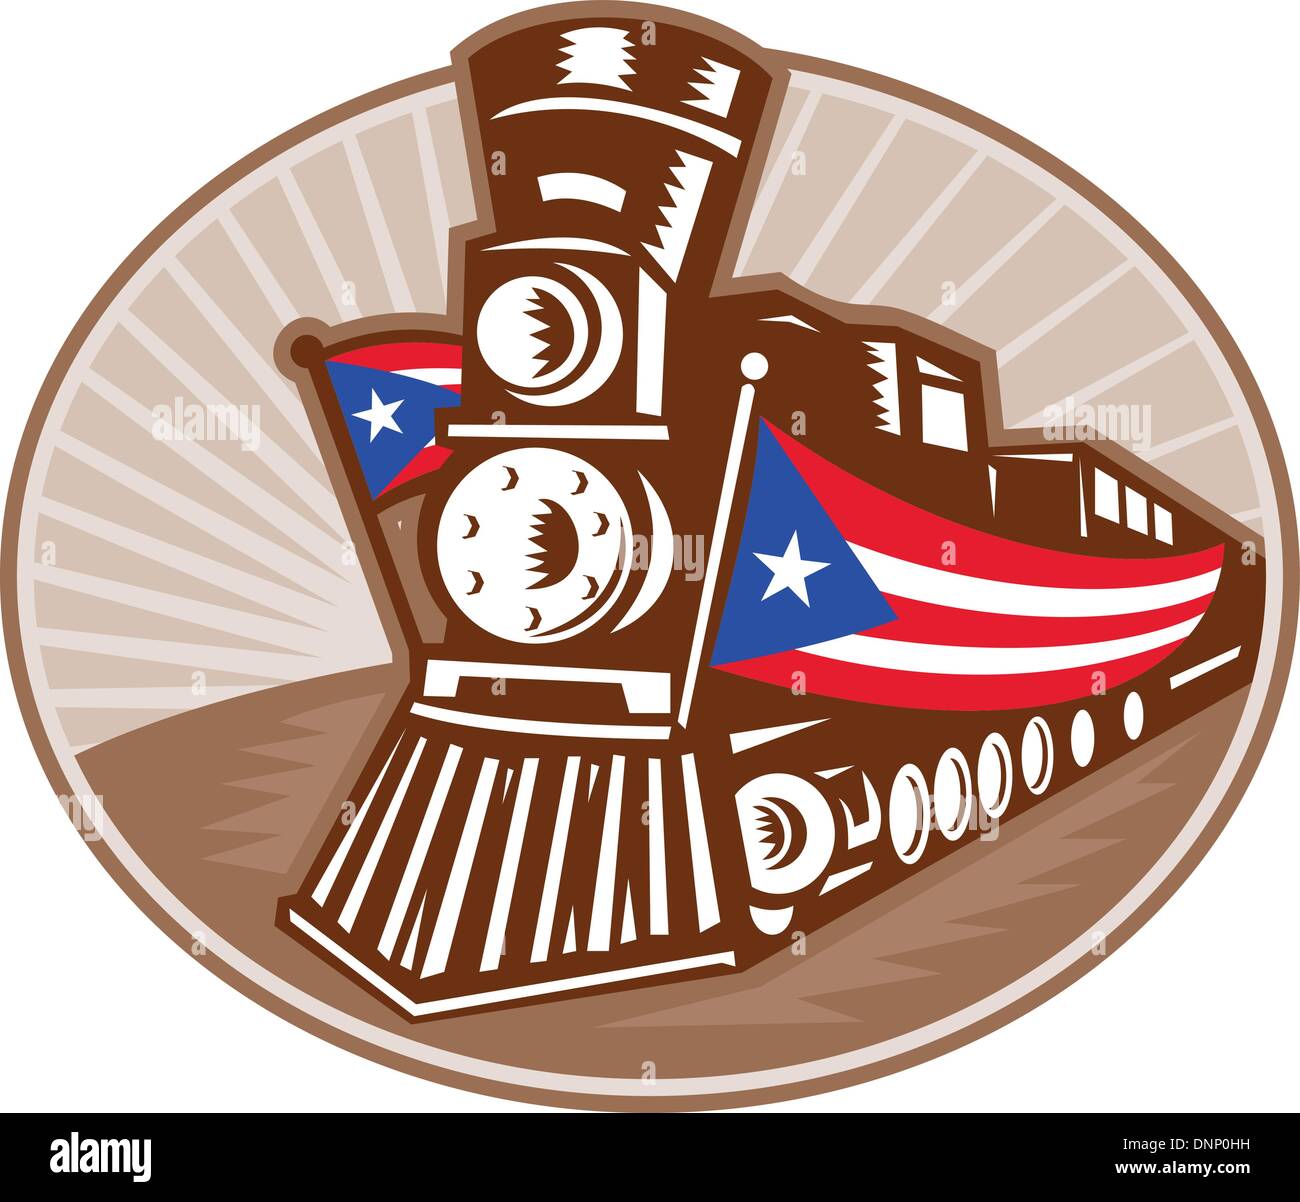 Illustration of a steam train locomotive with American stars and stripes flag dome in retro woodcut style. Stock Vector